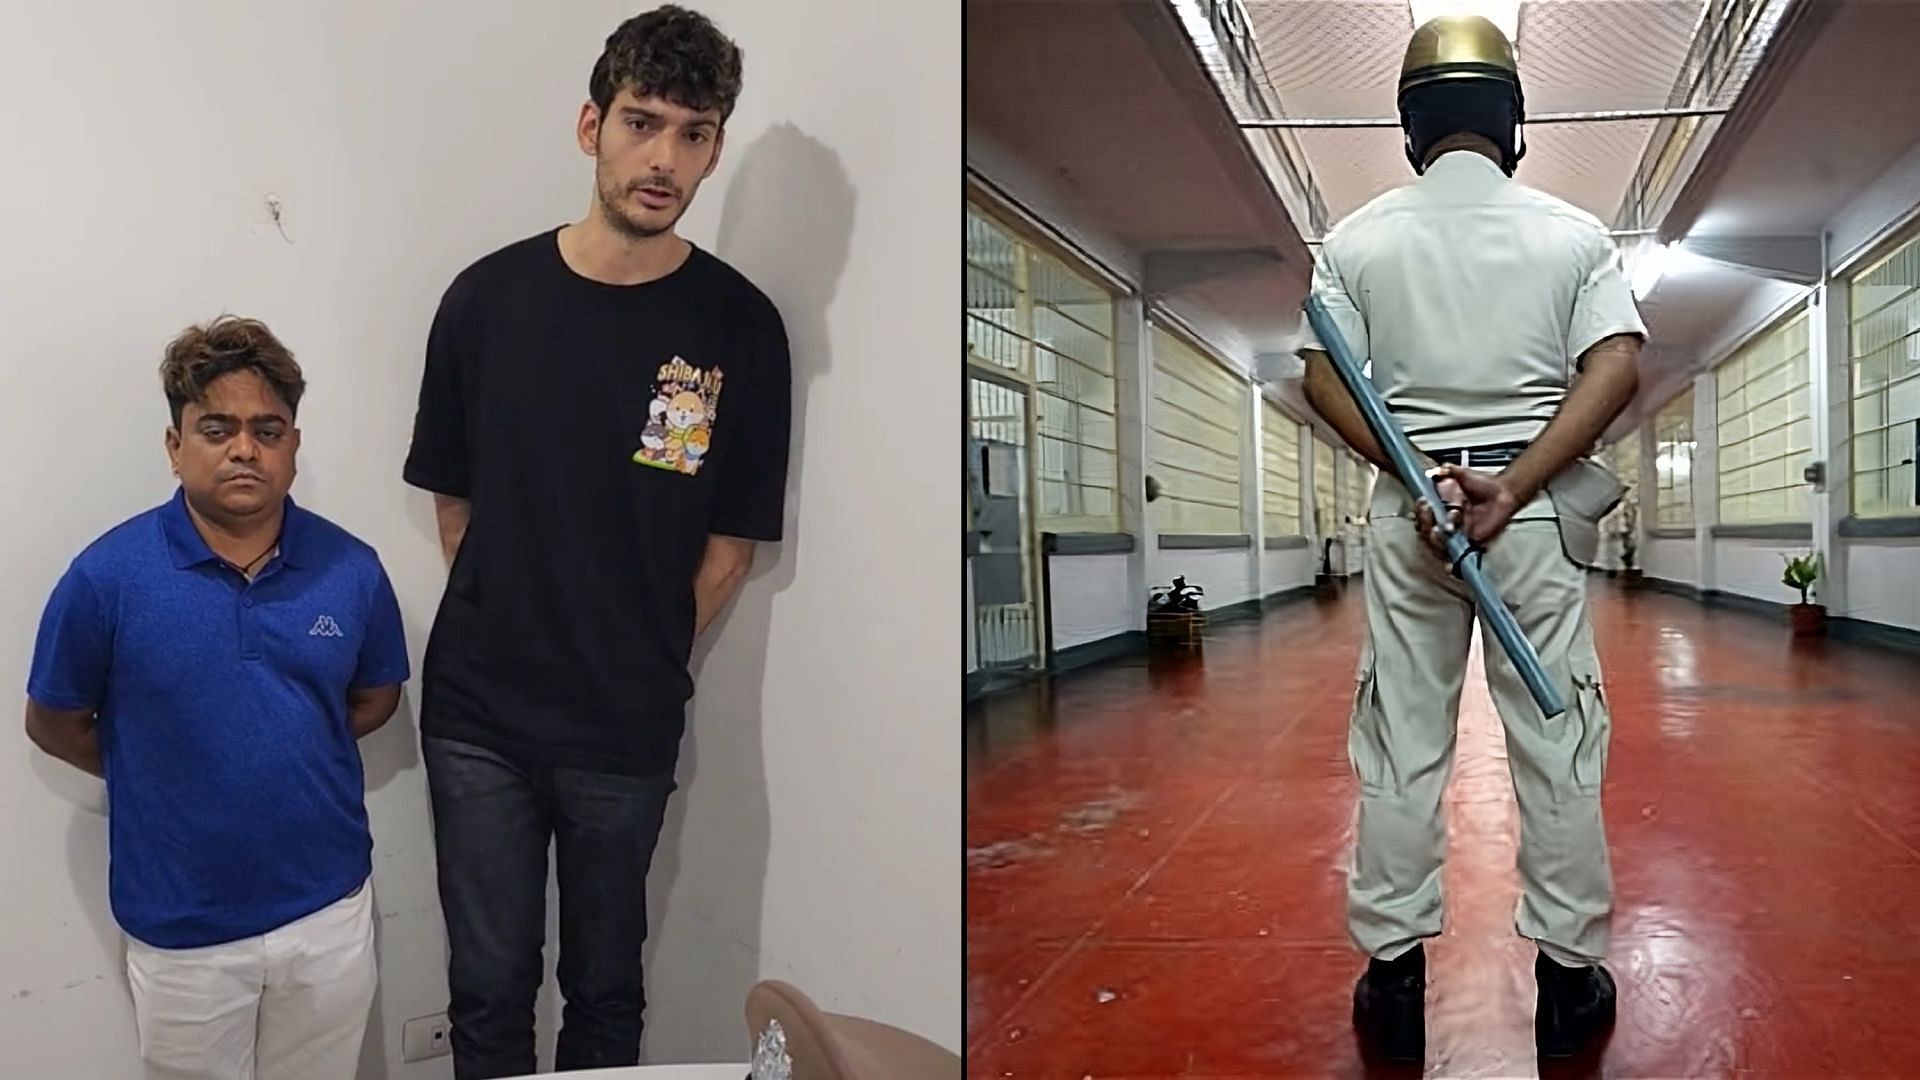 Ice Poseidon may face prison time after his recent arrest in Thailand (Image via Getty)